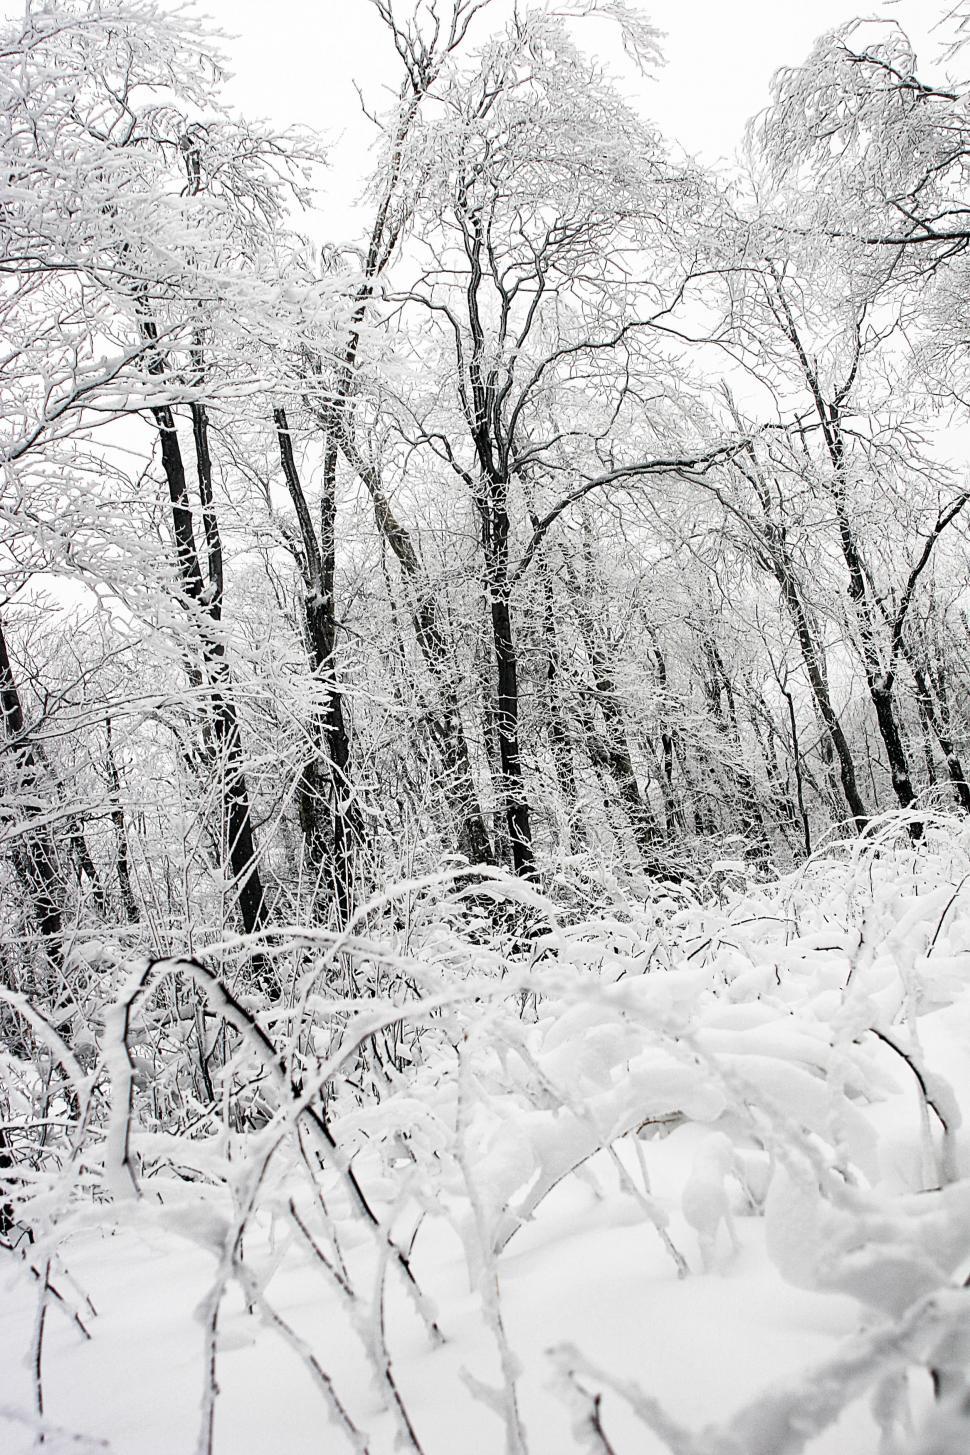 Free Image of Snow-Covered Trees in Black and White 